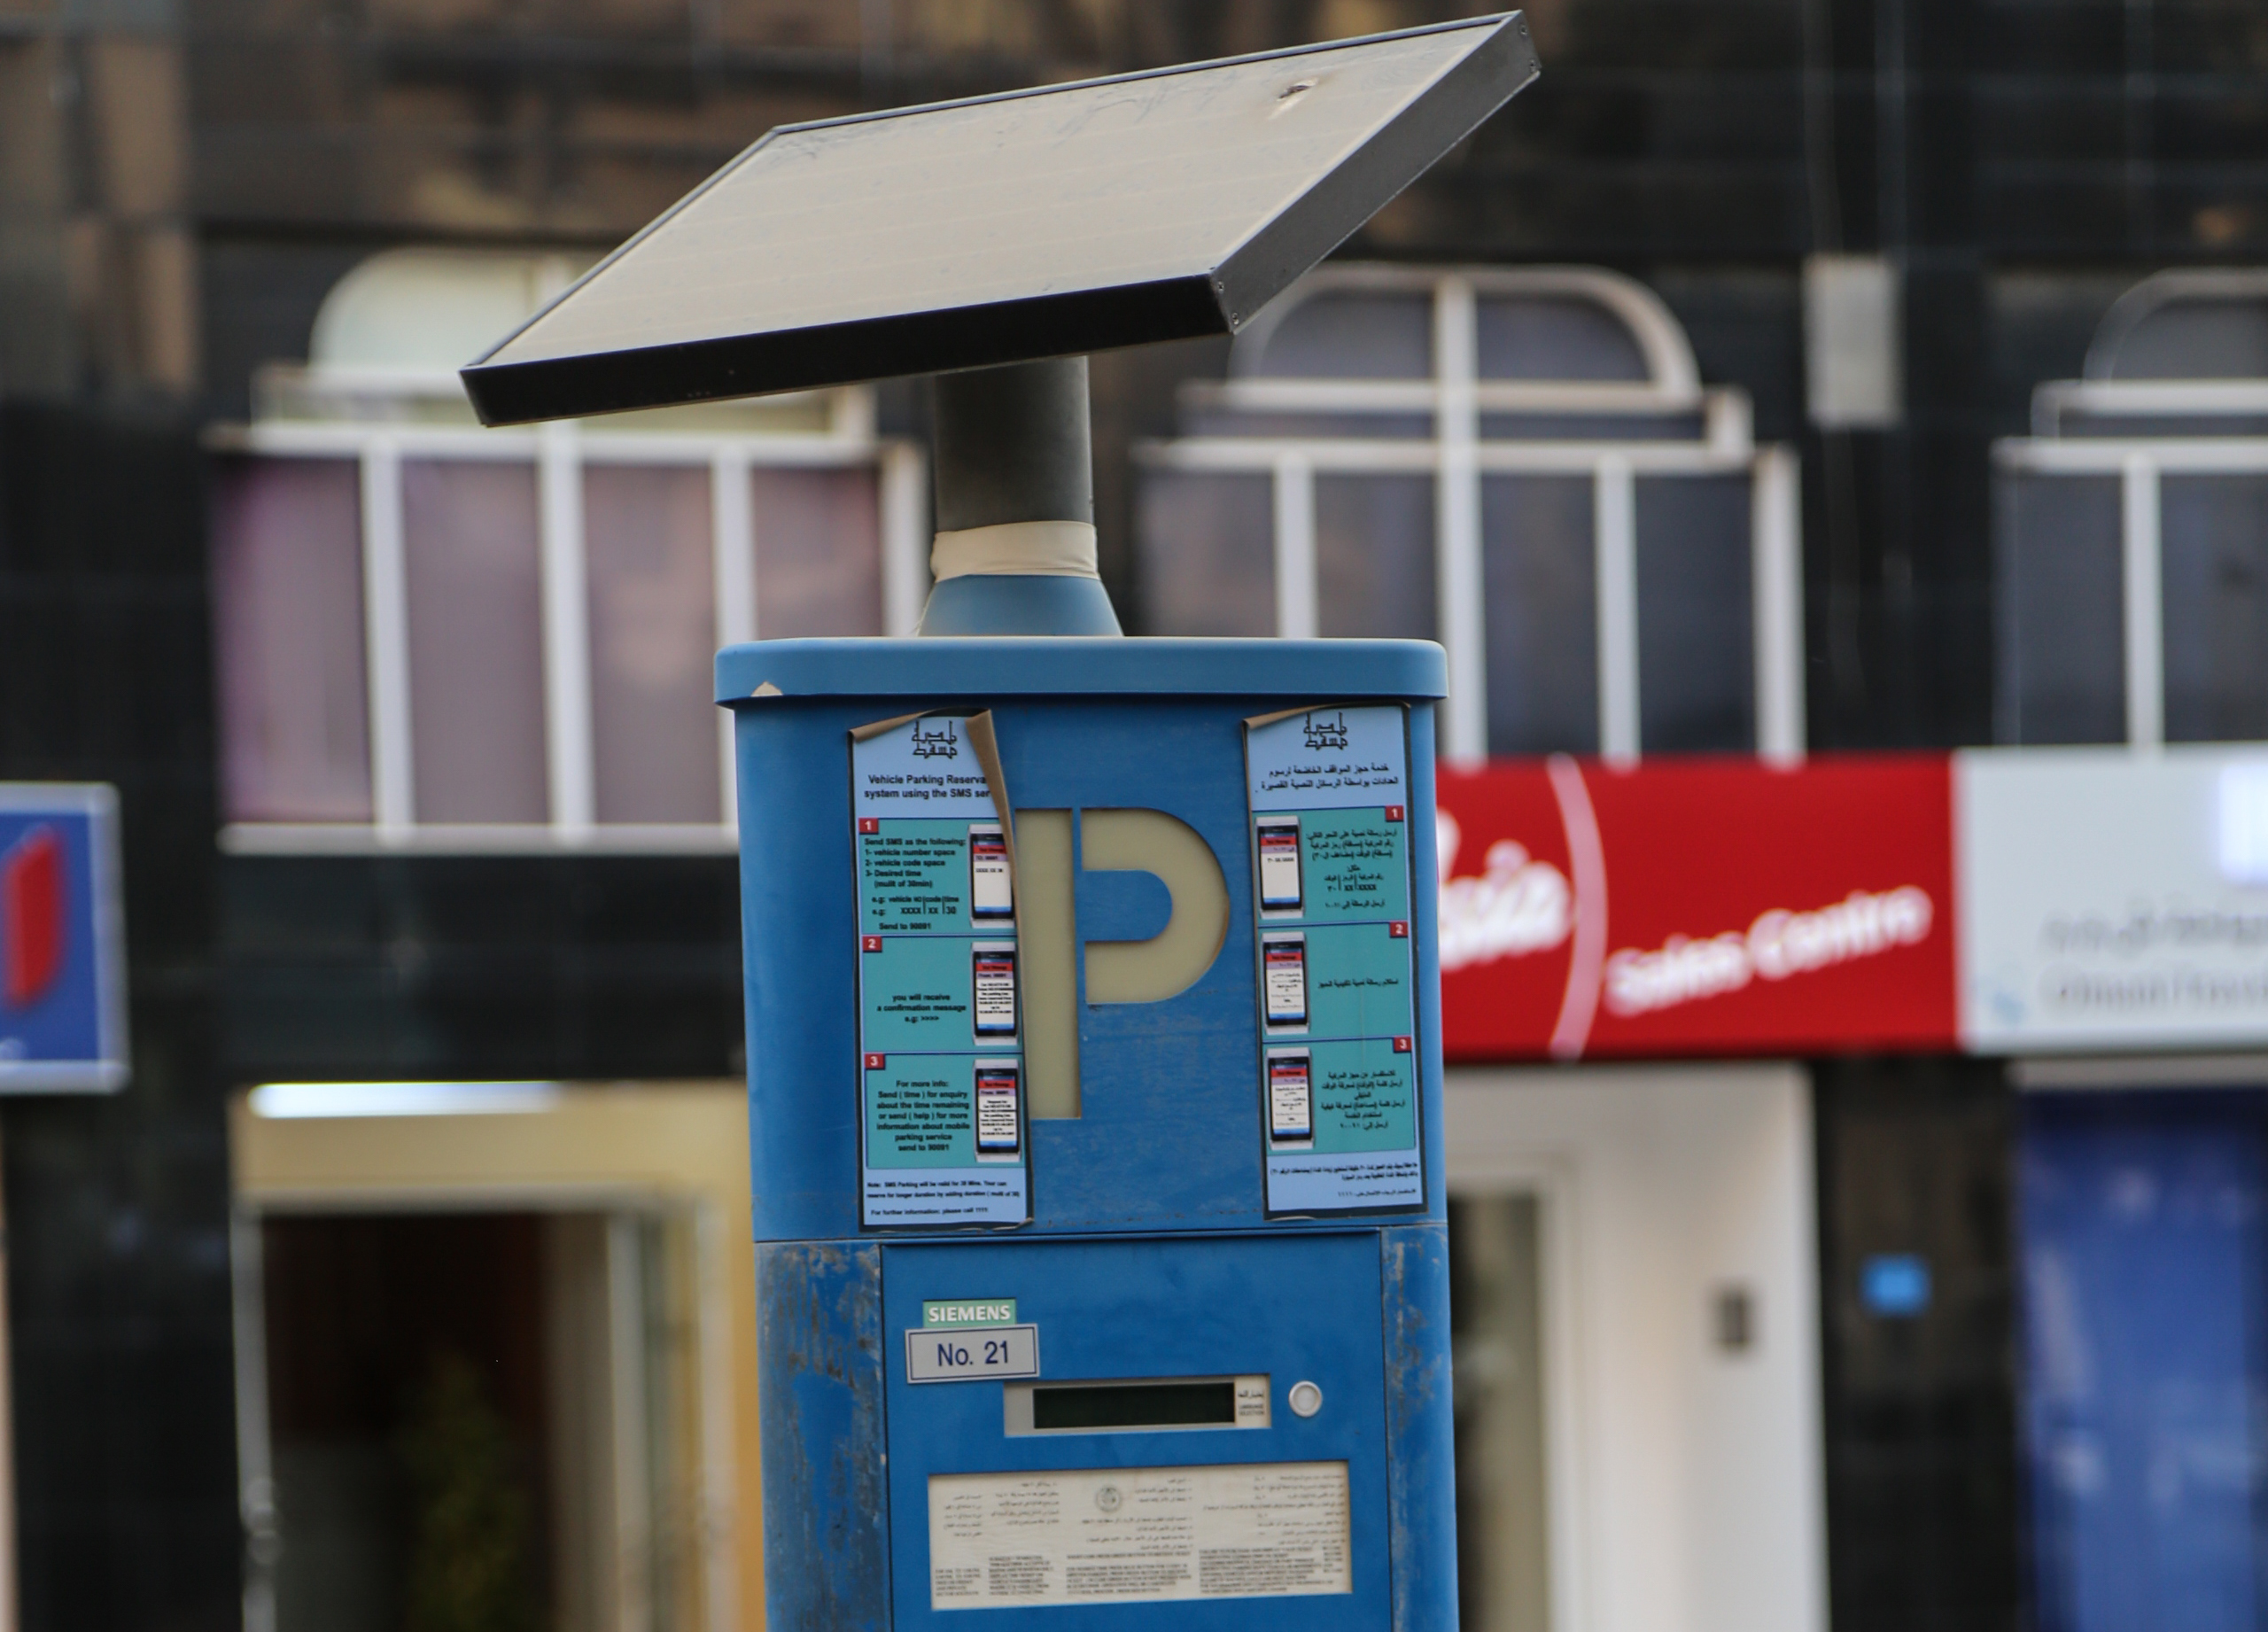 Oman transport: New parking fees go into force in Muscat